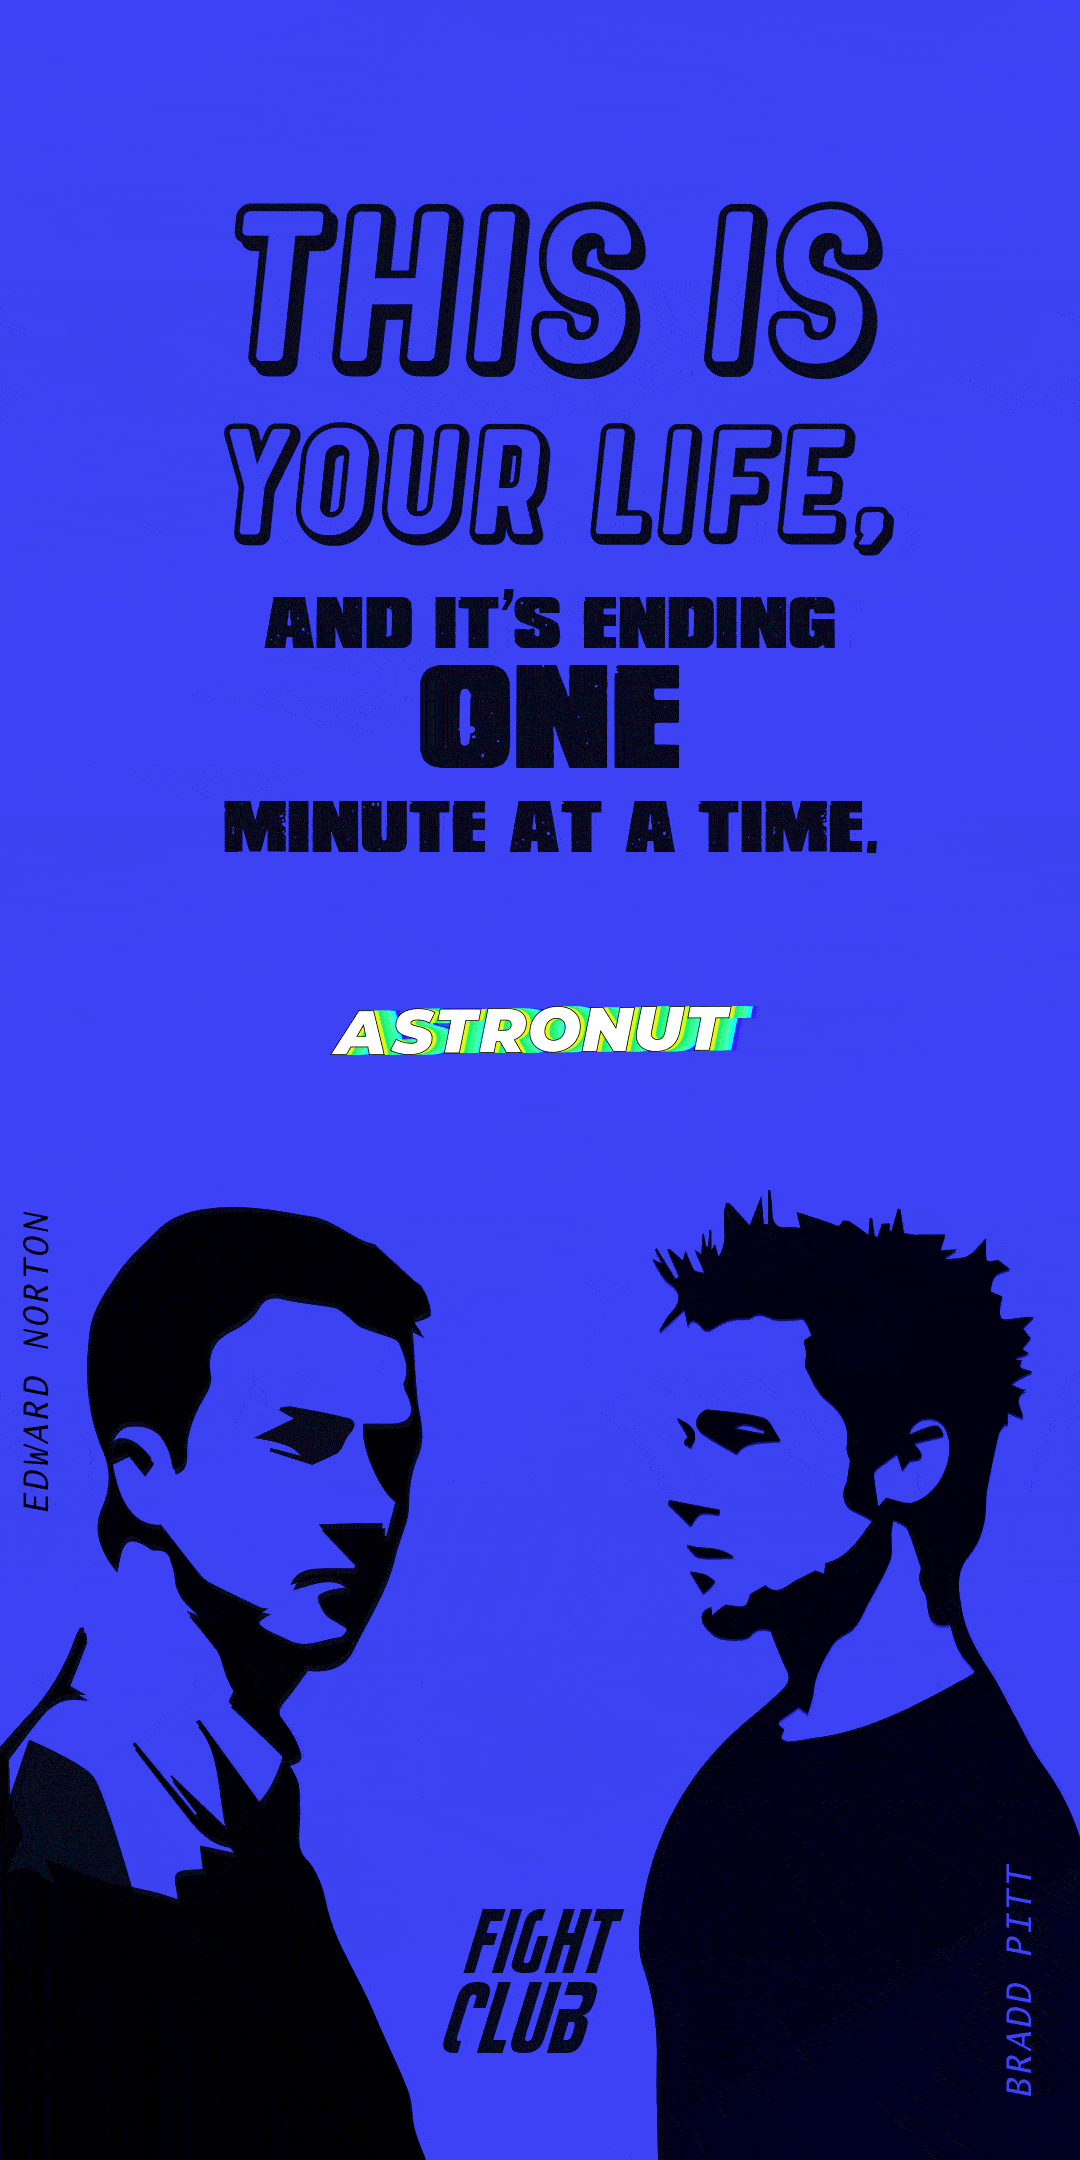 "This is your life and it's ending one minute at a time" Quote from FIGHT CLUB movie